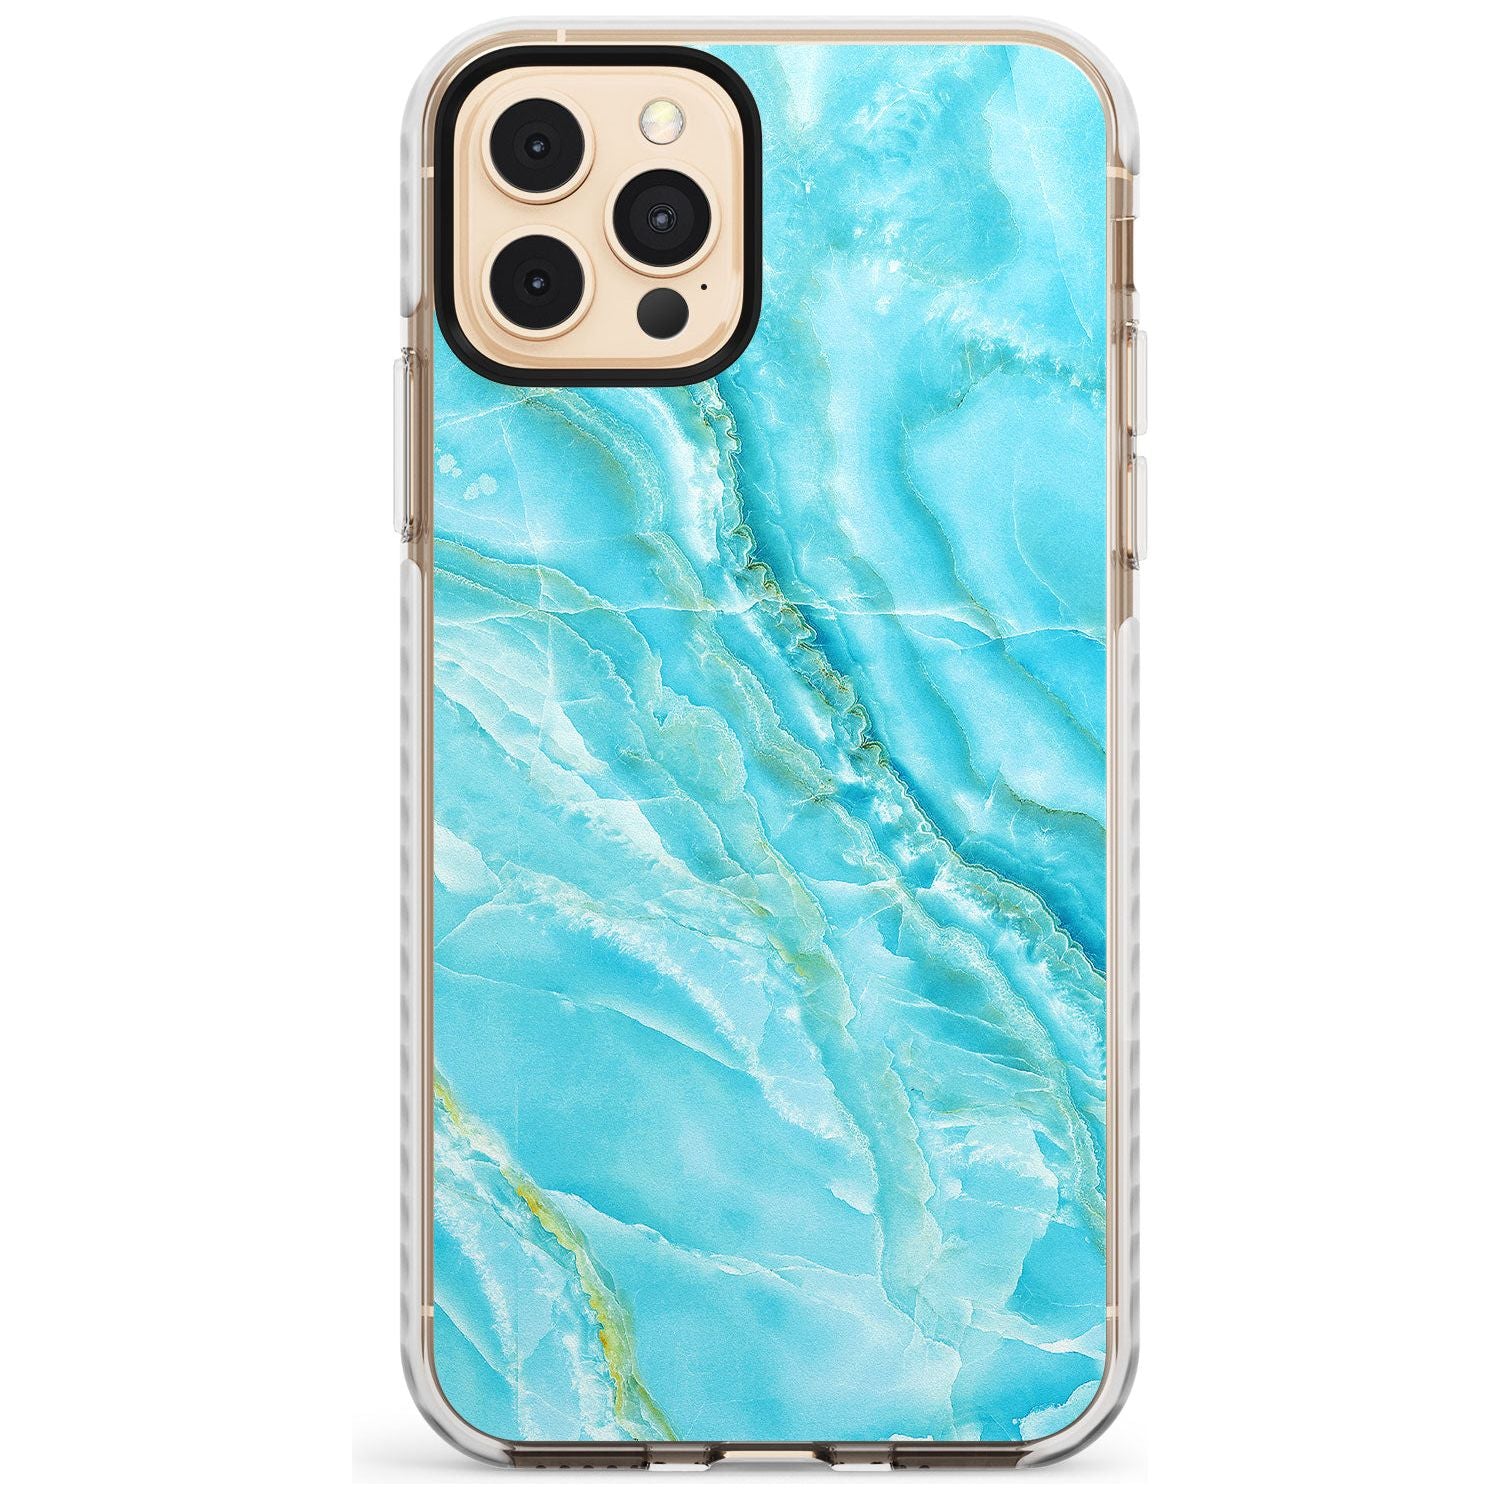 Bright Blue Onyx Marble Texture Slim TPU Phone Case for iPhone 11 Pro Max